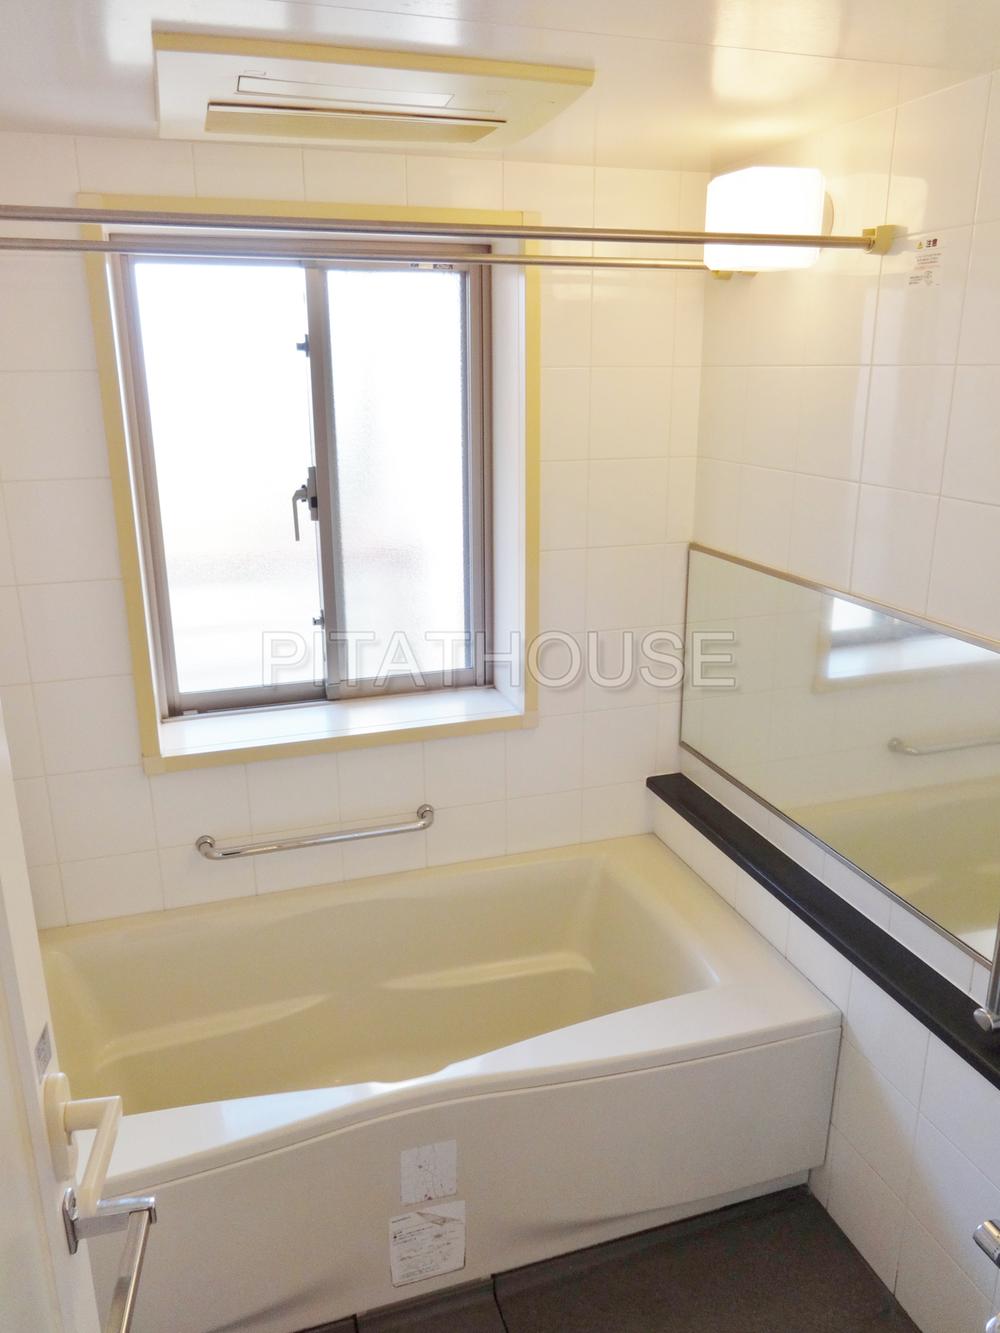 Bathroom.  [bathroom] With rare small window in the apartment. Ventilation also excellent